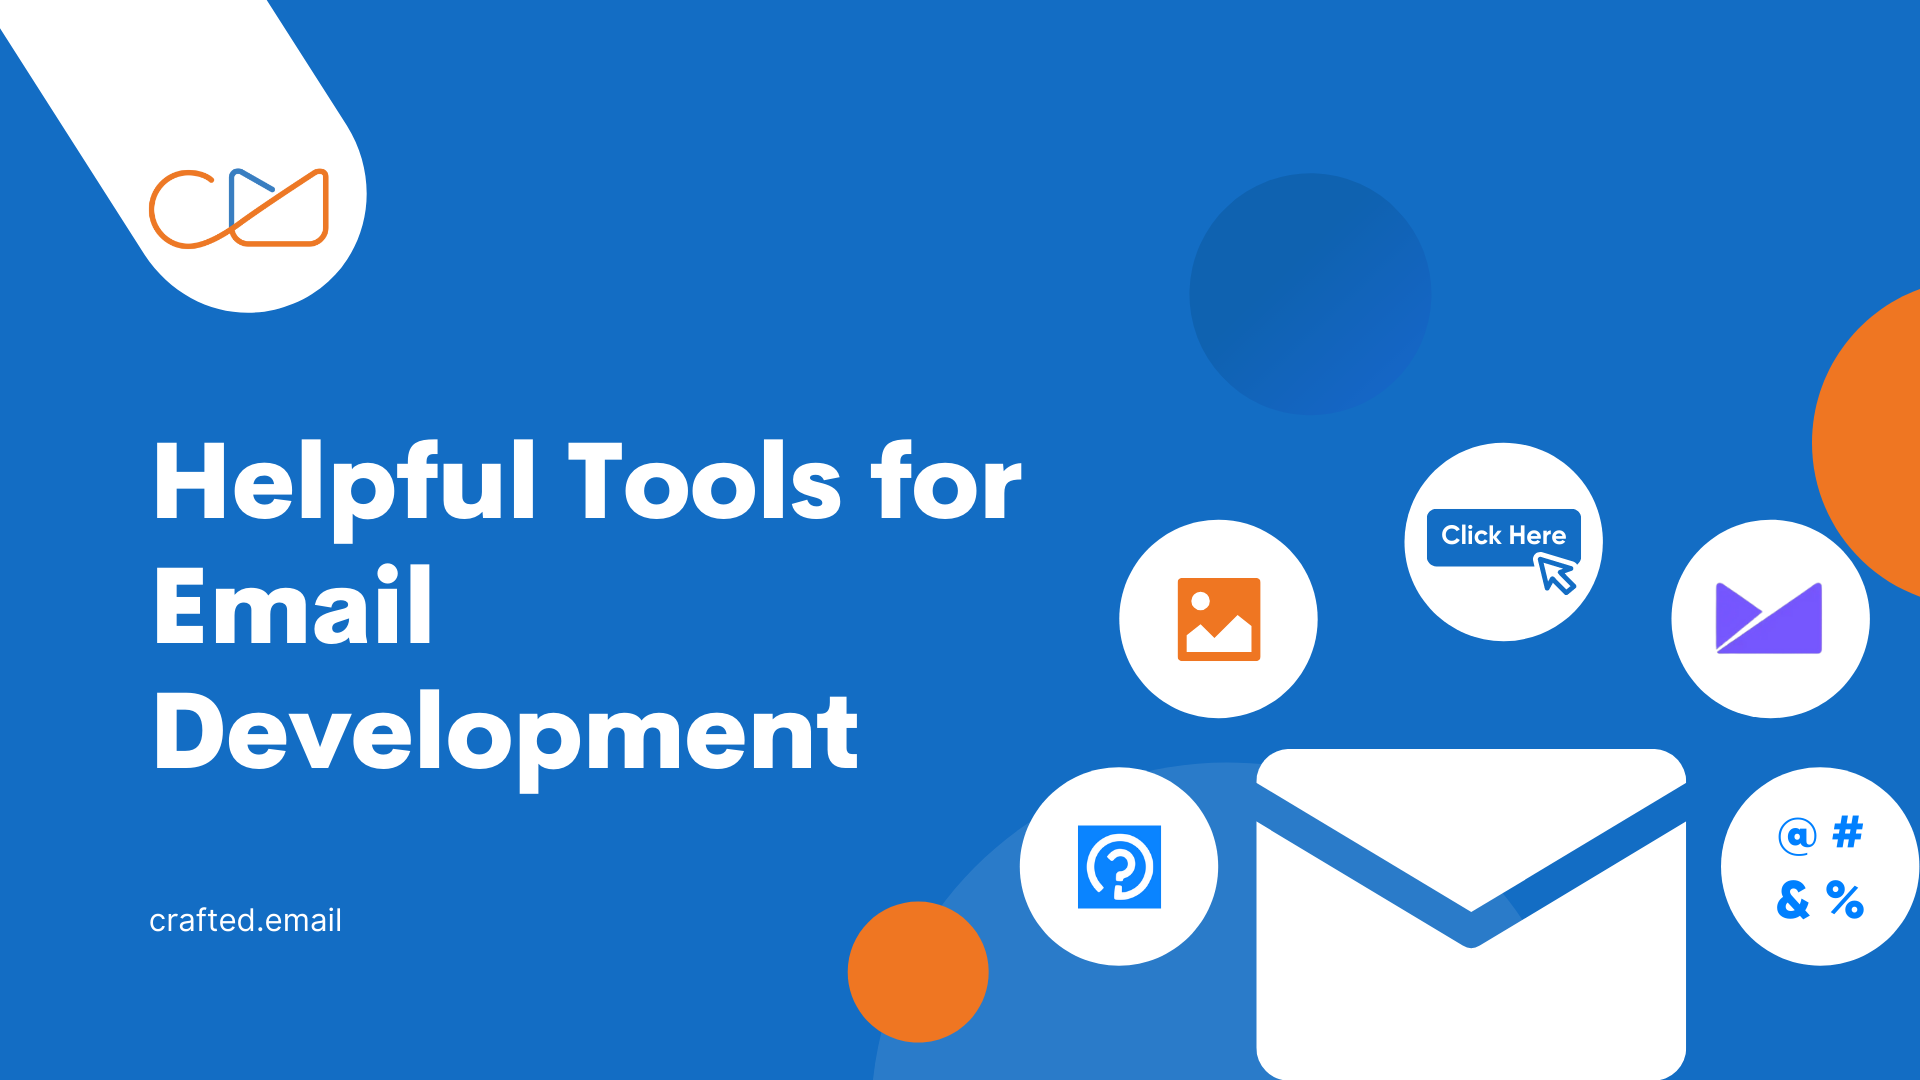 Helpful Tools for Email Development